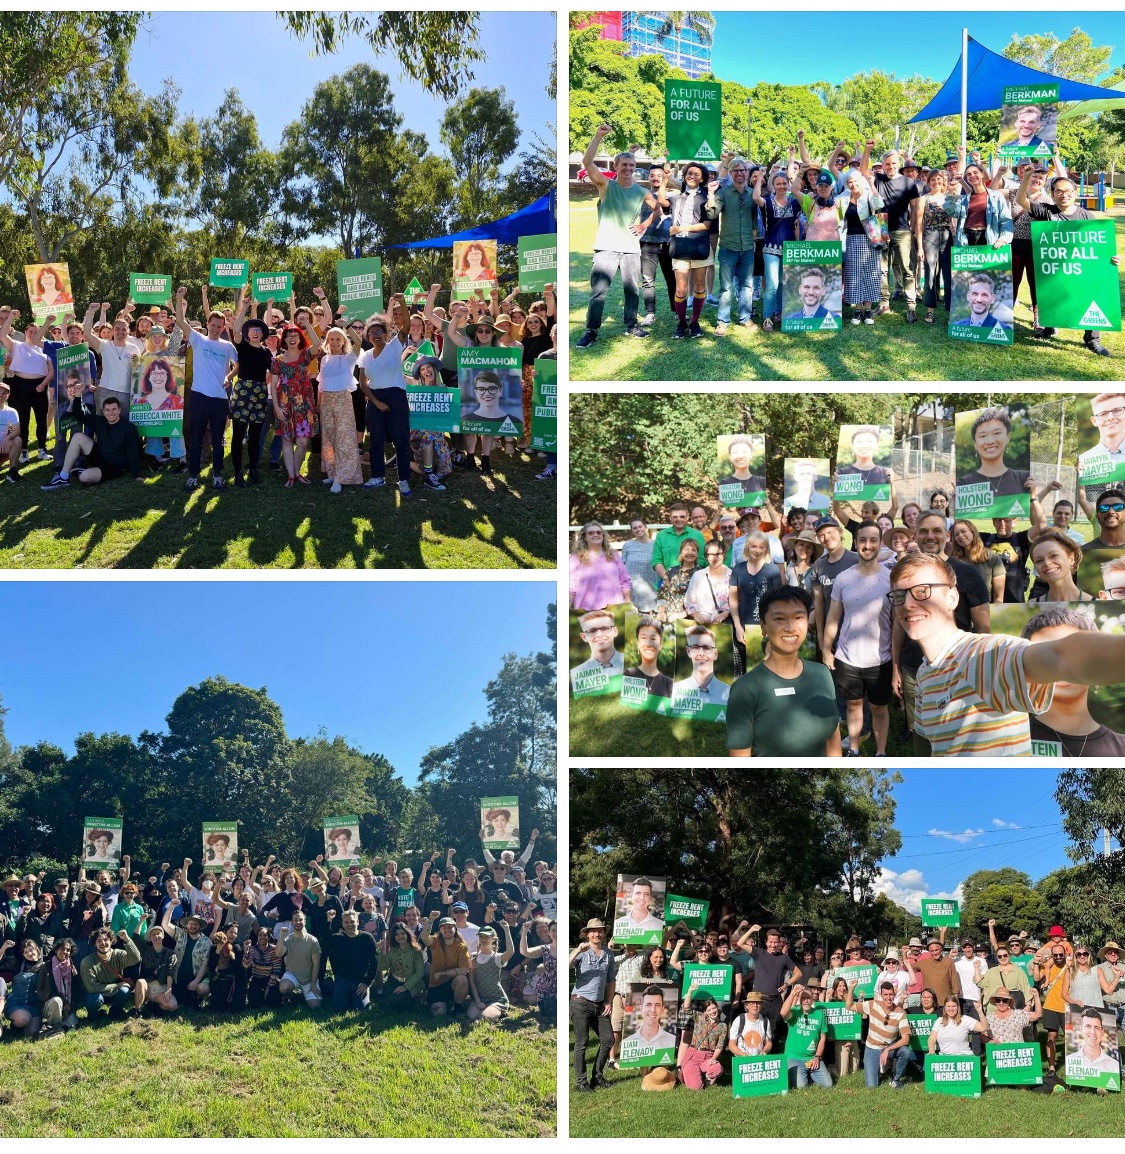 This is what one weekend of doorknocking from the Greens looks like in Brisbane. Message to Labor and the Liberals, this is what happens when you screw over millions of people in favour of massive corporate profits - eventually people get fed up and start fighting back.